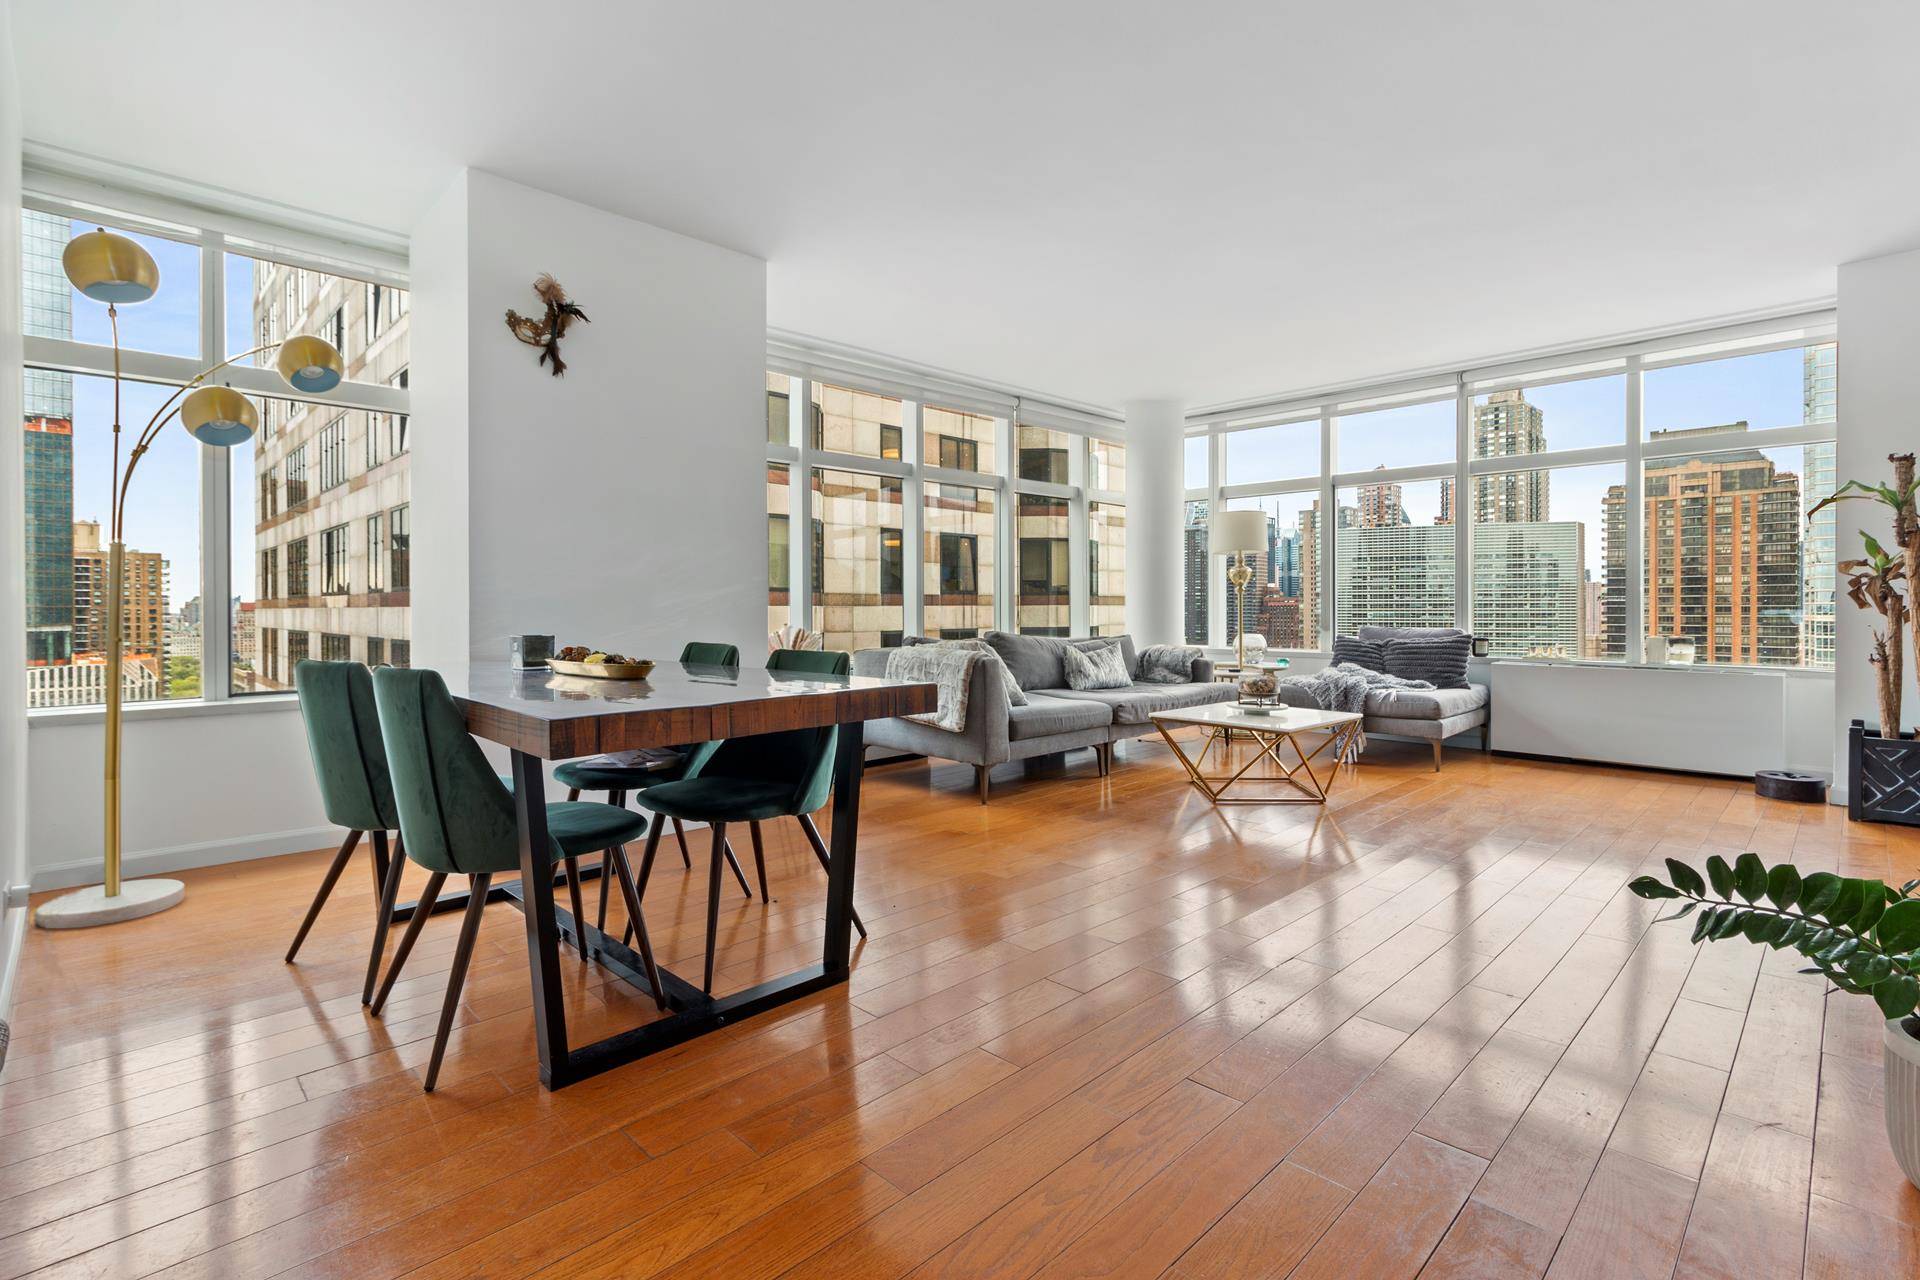 Live in absolute luxury and take in the sweeping Hudson river and skyline vistas from this 27th floor, corner 2 Bedroom, 2 and a half Bathroom home.